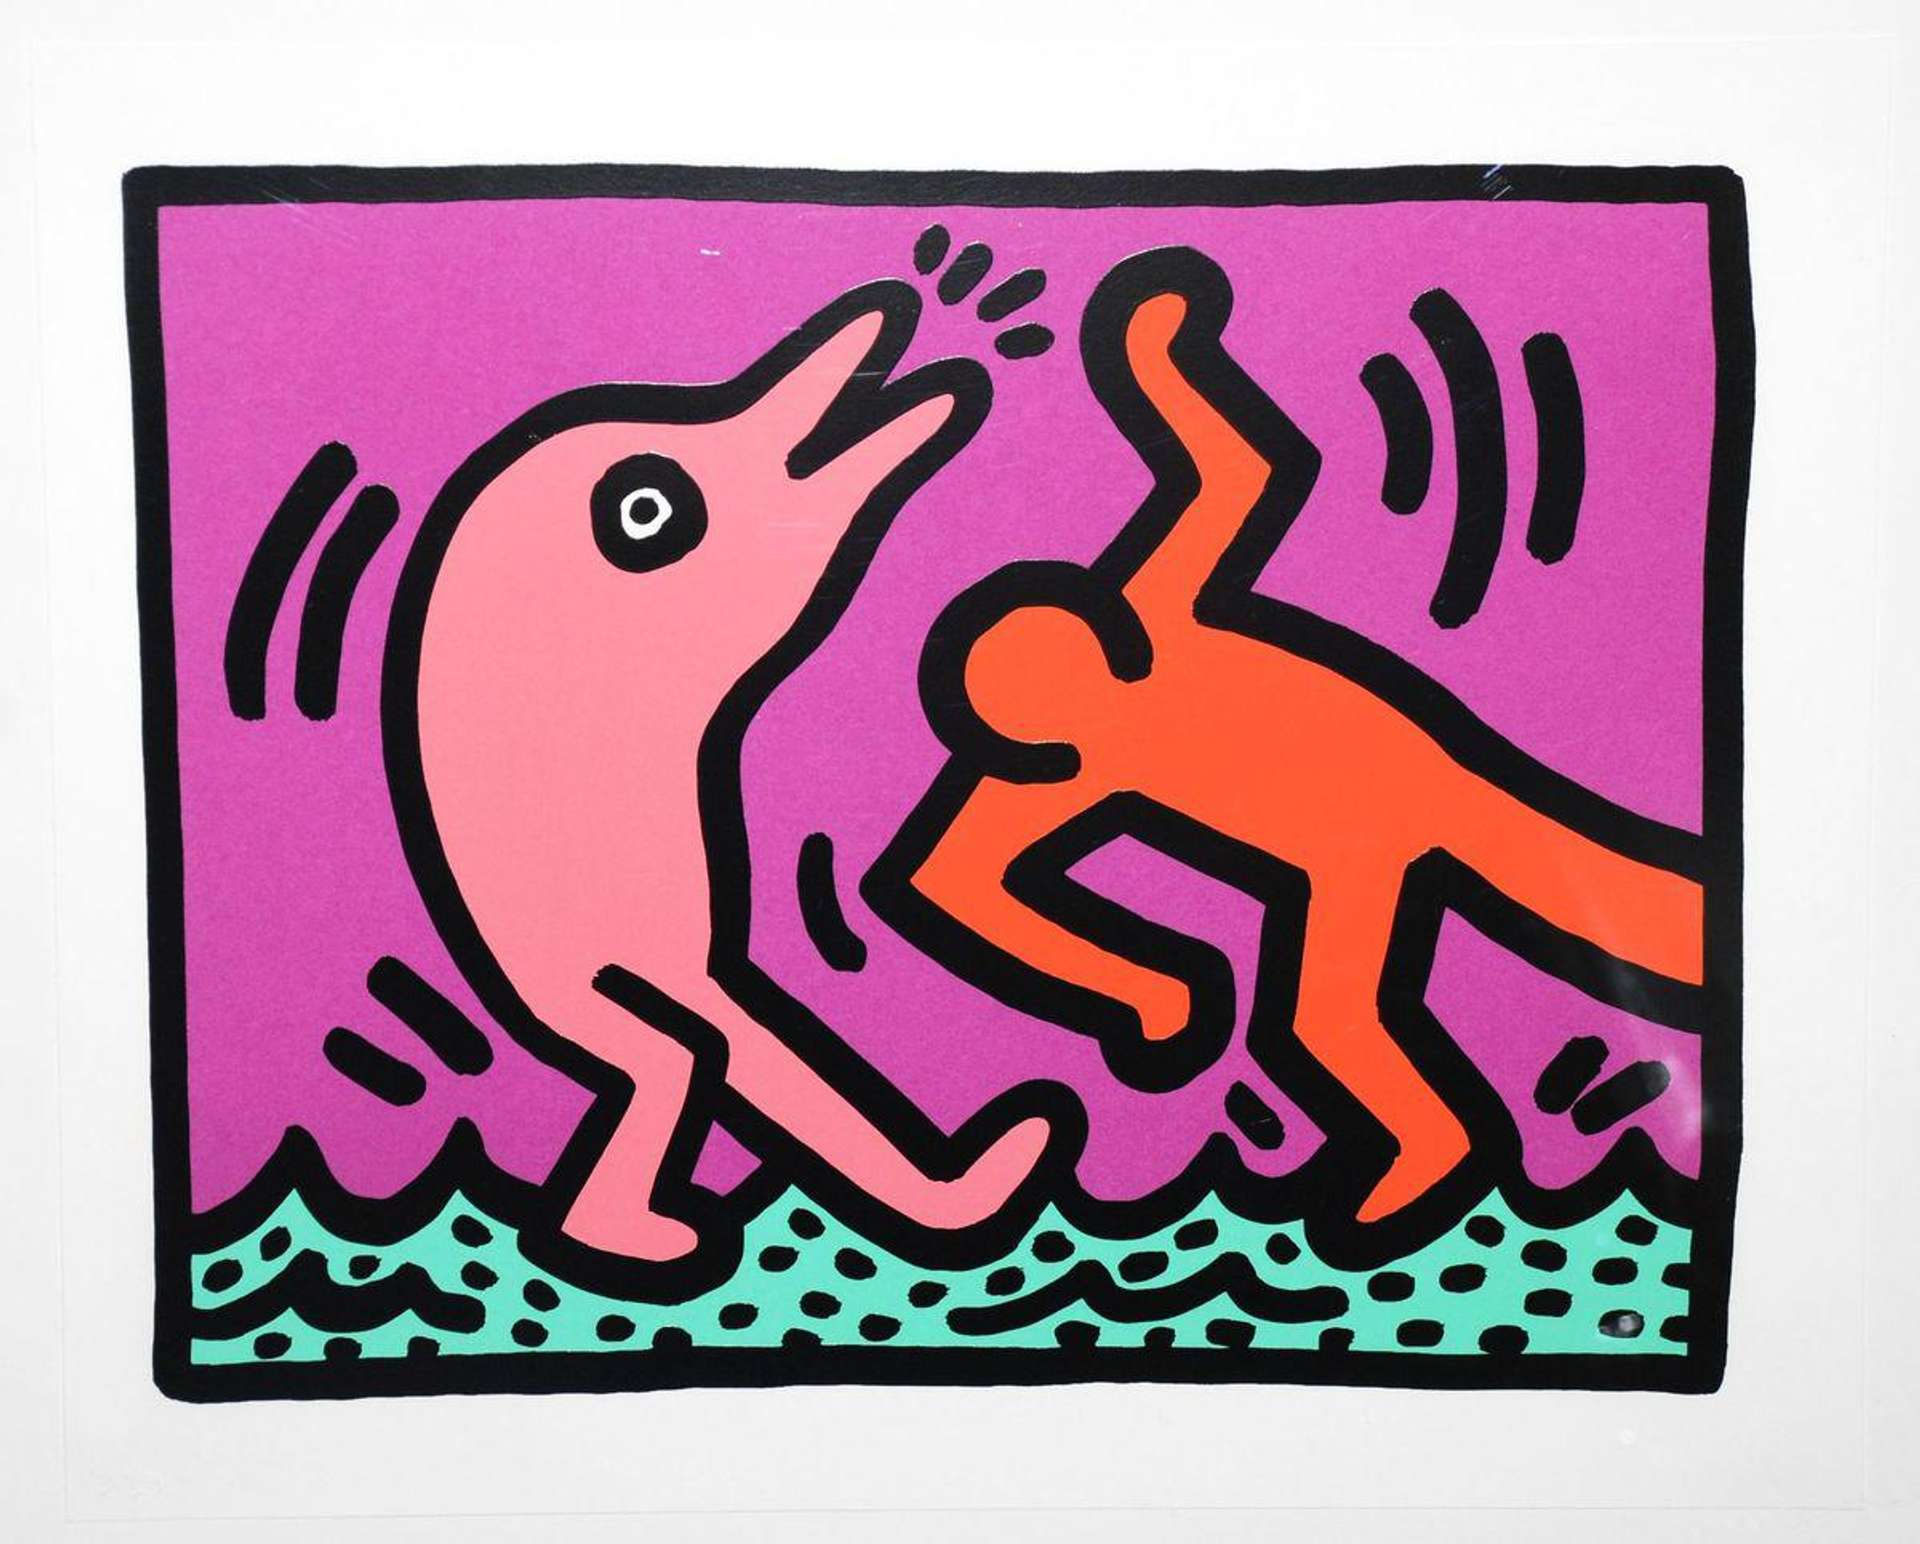 Keith Haring’s Pop Shop V, Plate IV. A Pop Art screenprint of a red, animated character dancing next to a pink dolphin.